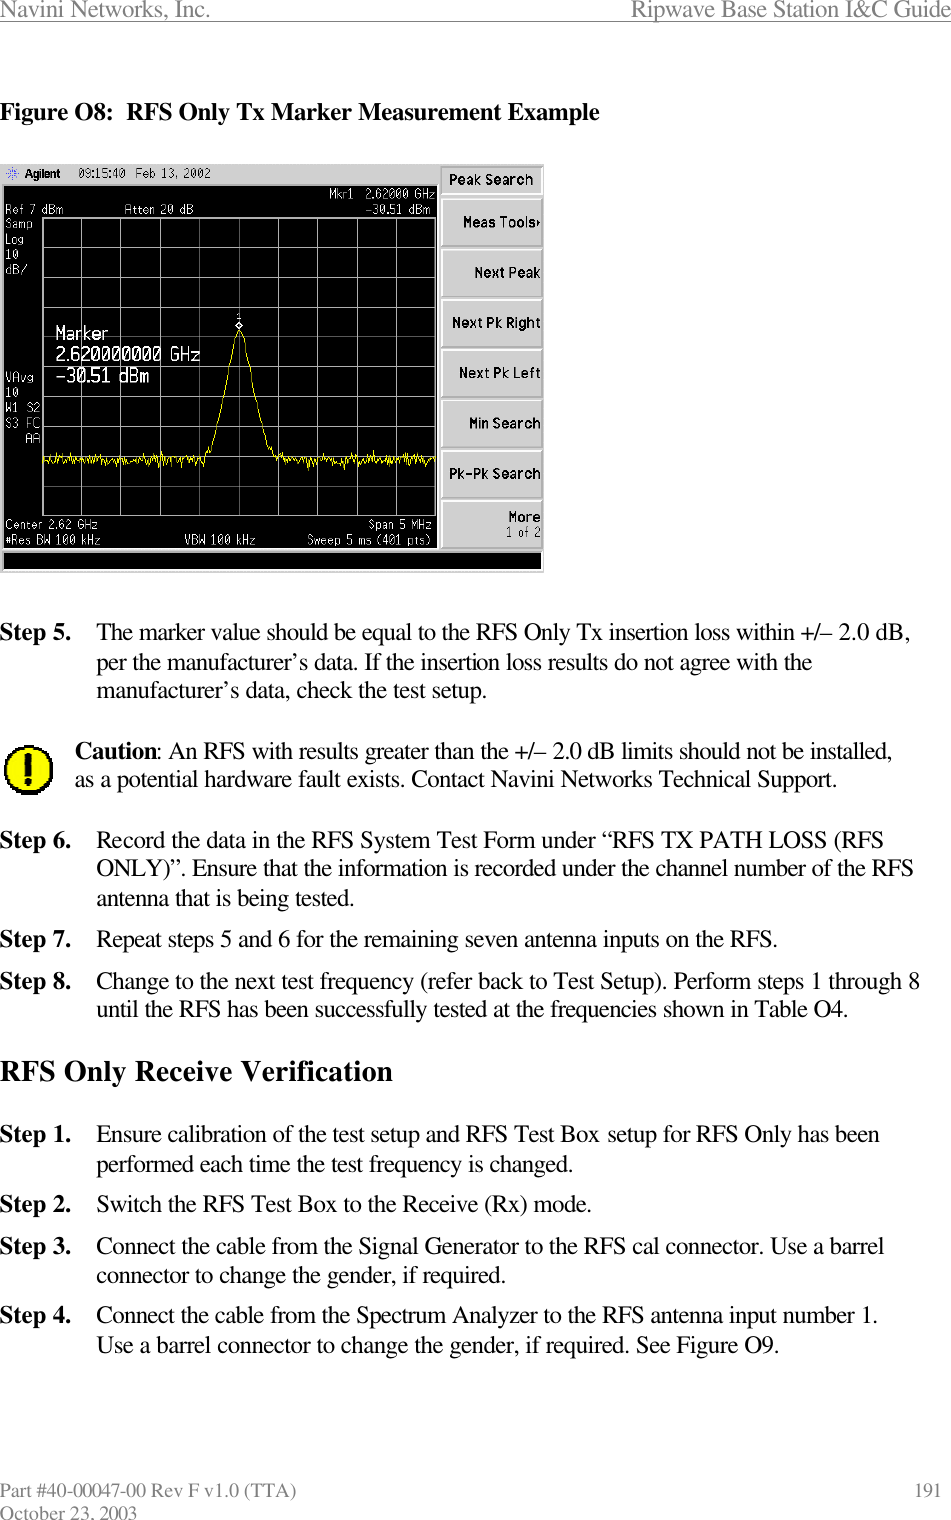 Navini Networks, Inc.                      Ripwave Base Station I&amp;C Guide Part #40-00047-00 Rev F v1.0 (TTA)            191 October 23, 2003  Figure O8:  RFS Only Tx Marker Measurement Example                  Step 5. The marker value should be equal to the RFS Only Tx insertion loss within +/– 2.0 dB, per the manufacturer’s data. If the insertion loss results do not agree with the manufacturer’s data, check the test setup.  Caution: An RFS with results greater than the +/– 2.0 dB limits should not be installed, as a potential hardware fault exists. Contact Navini Networks Technical Support.  Step 6. Record the data in the RFS System Test Form under “RFS TX PATH LOSS (RFS ONLY)”. Ensure that the information is recorded under the channel number of the RFS antenna that is being tested. Step 7. Repeat steps 5 and 6 for the remaining seven antenna inputs on the RFS. Step 8. Change to the next test frequency (refer back to Test Setup). Perform steps 1 through 8 until the RFS has been successfully tested at the frequencies shown in Table O4.  RFS Only Receive Verification  Step 1. Ensure calibration of the test setup and RFS Test Box setup for RFS Only has been performed each time the test frequency is changed. Step 2. Switch the RFS Test Box to the Receive (Rx) mode. Step 3. Connect the cable from the Signal Generator to the RFS cal connector. Use a barrel connector to change the gender, if required. Step 4. Connect the cable from the Spectrum Analyzer to the RFS antenna input number 1. Use a barrel connector to change the gender, if required. See Figure O9.  